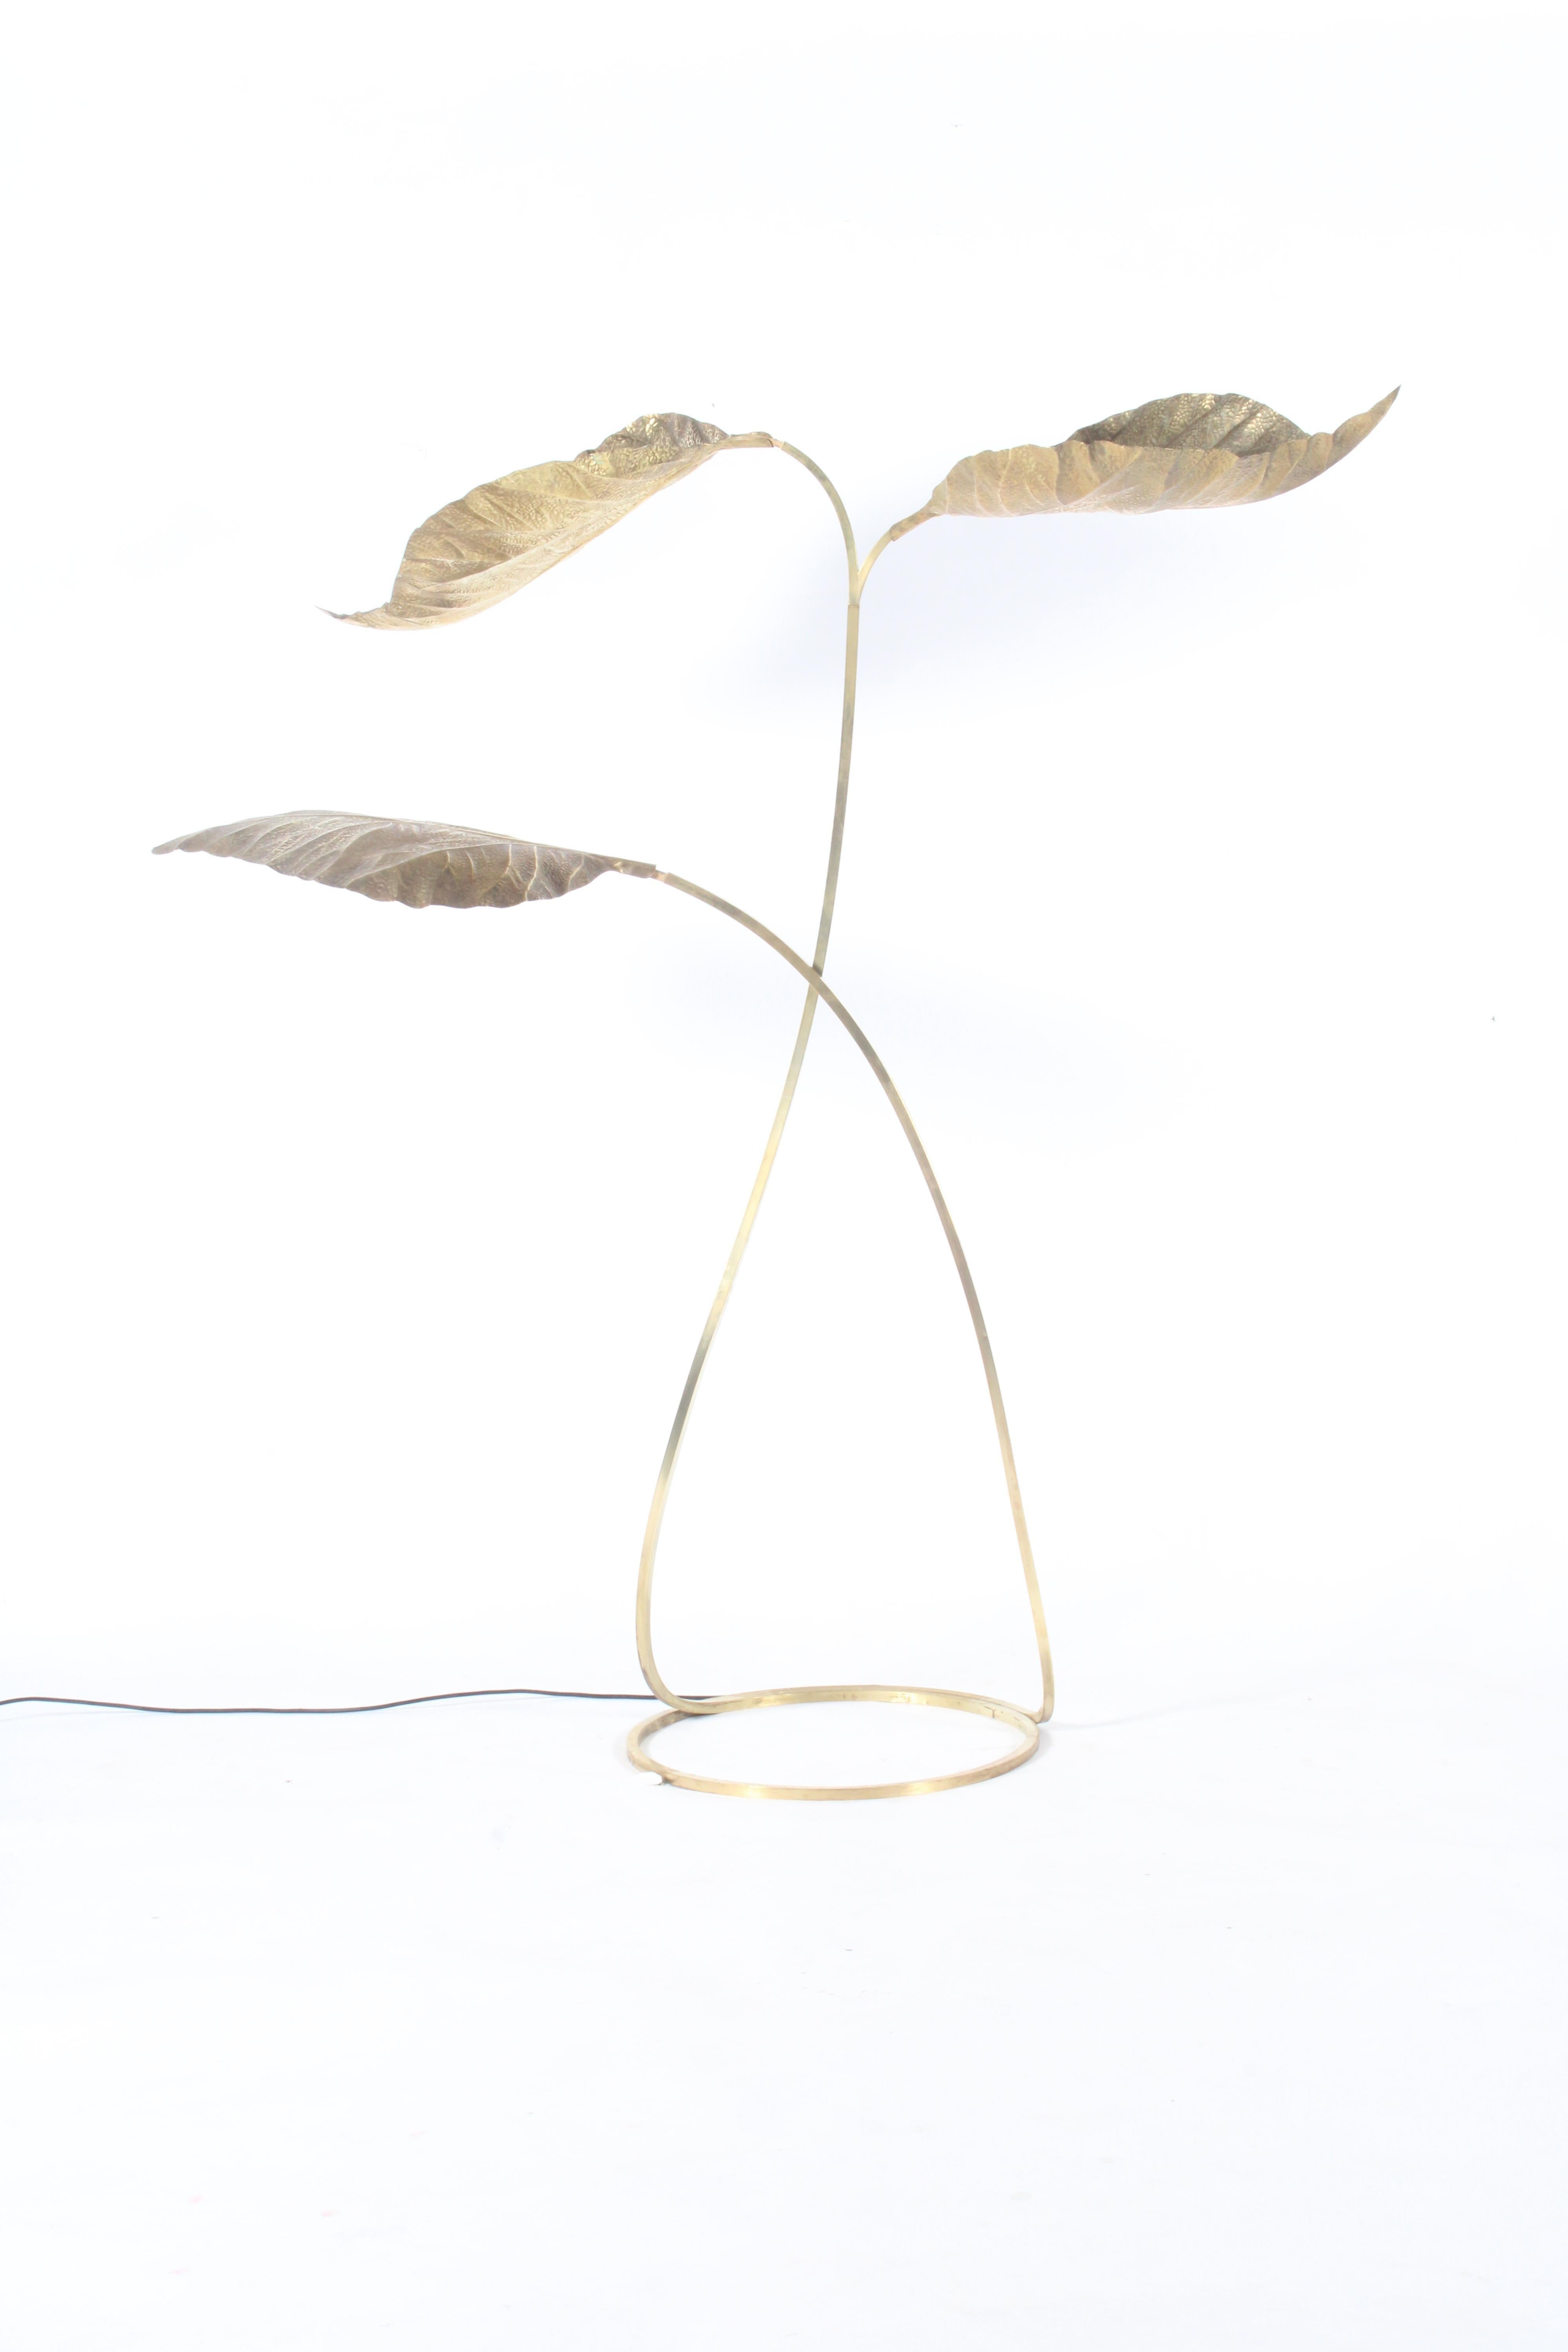 This remarkable floor lamp was created by designer sculptor Carlo Giorgi for Atelier Bottega Gadda in Milan circa 1970. A stunning piece it does not conform to one specific category, although its primary function is that of a floor lamp and it casts